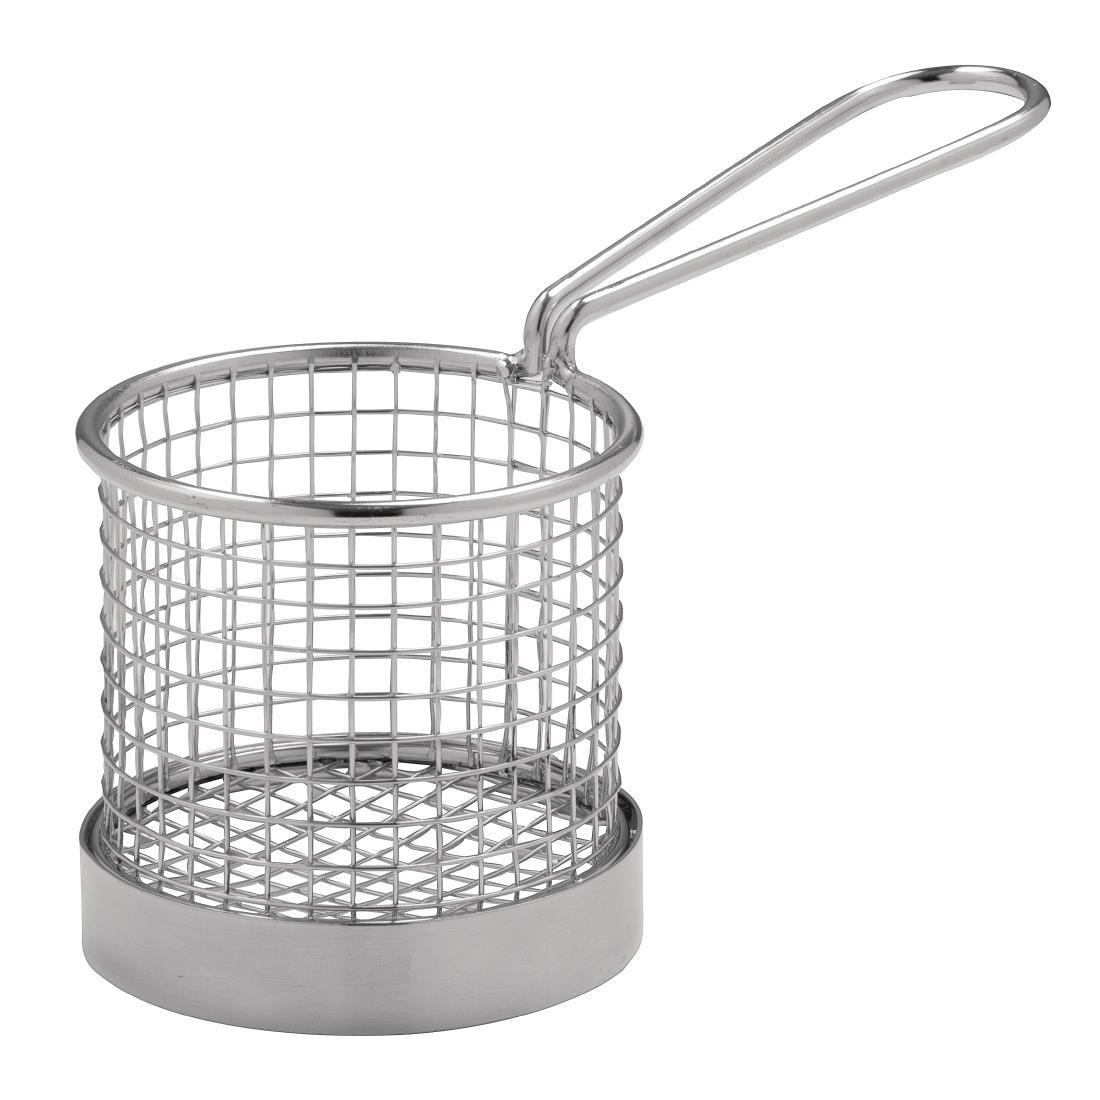 Olympia Chip basket Round with Handle 80mm - CE148  - 1